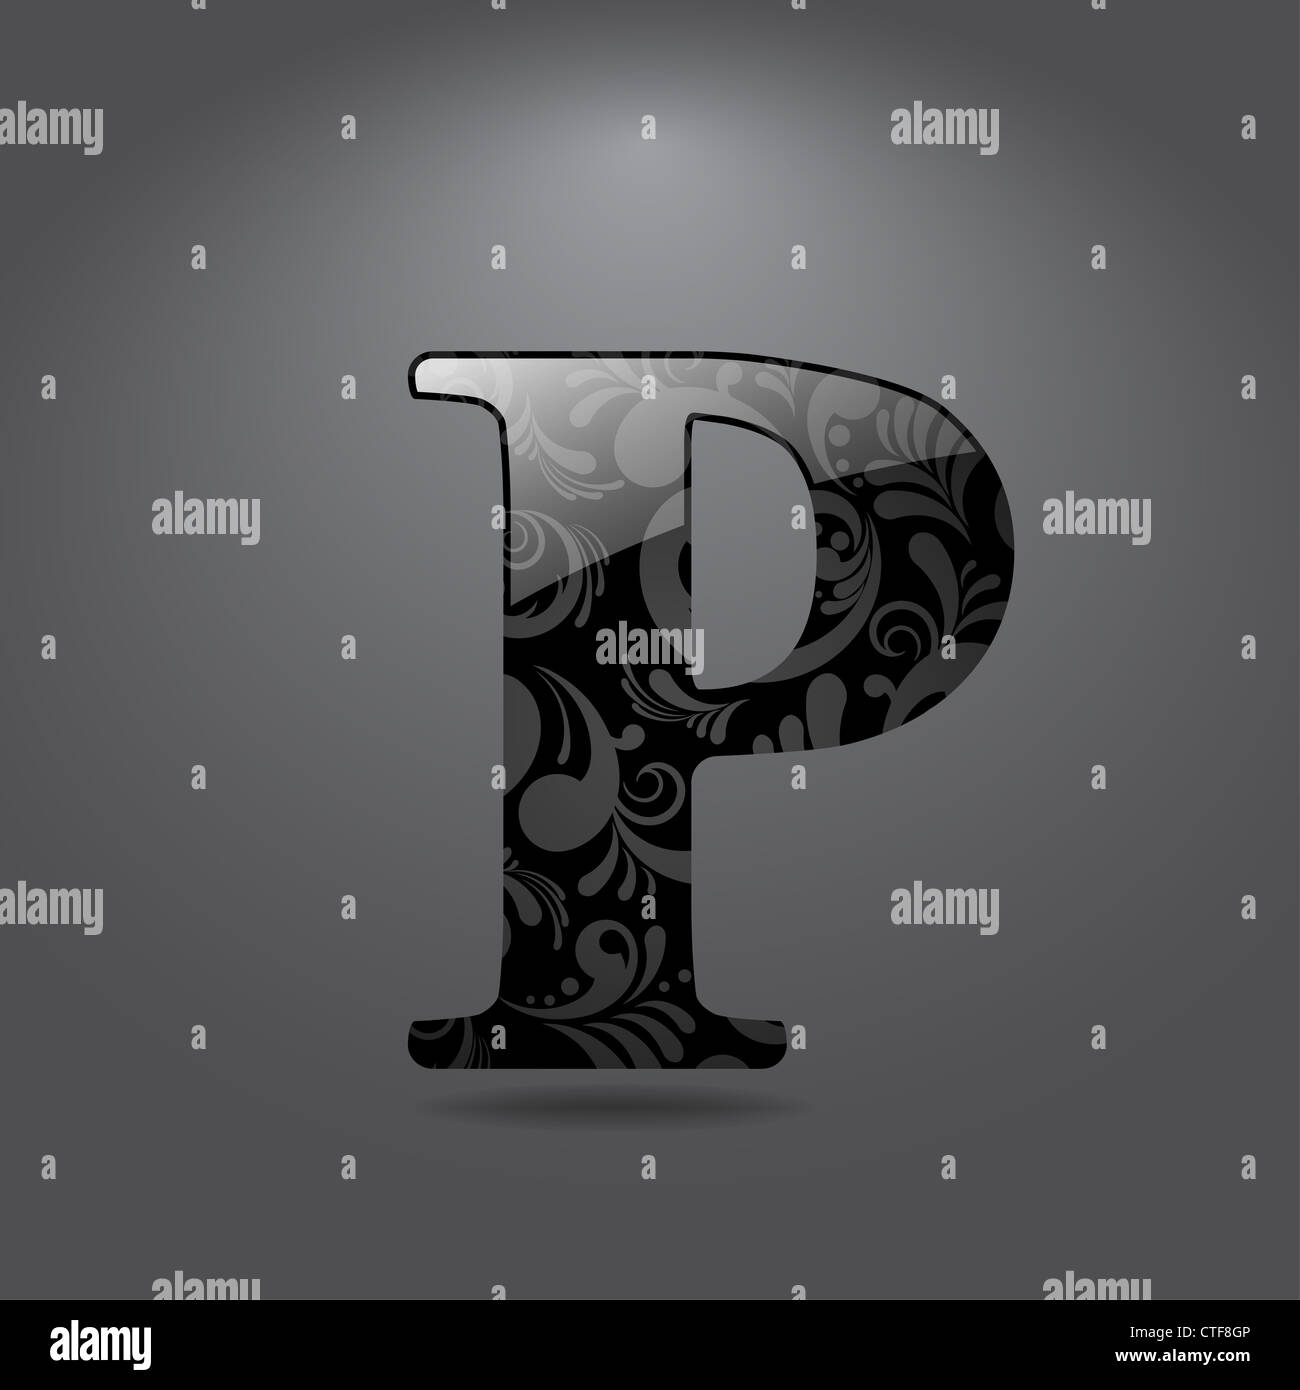 Glossy letter P isolated on gray background Stock Photo